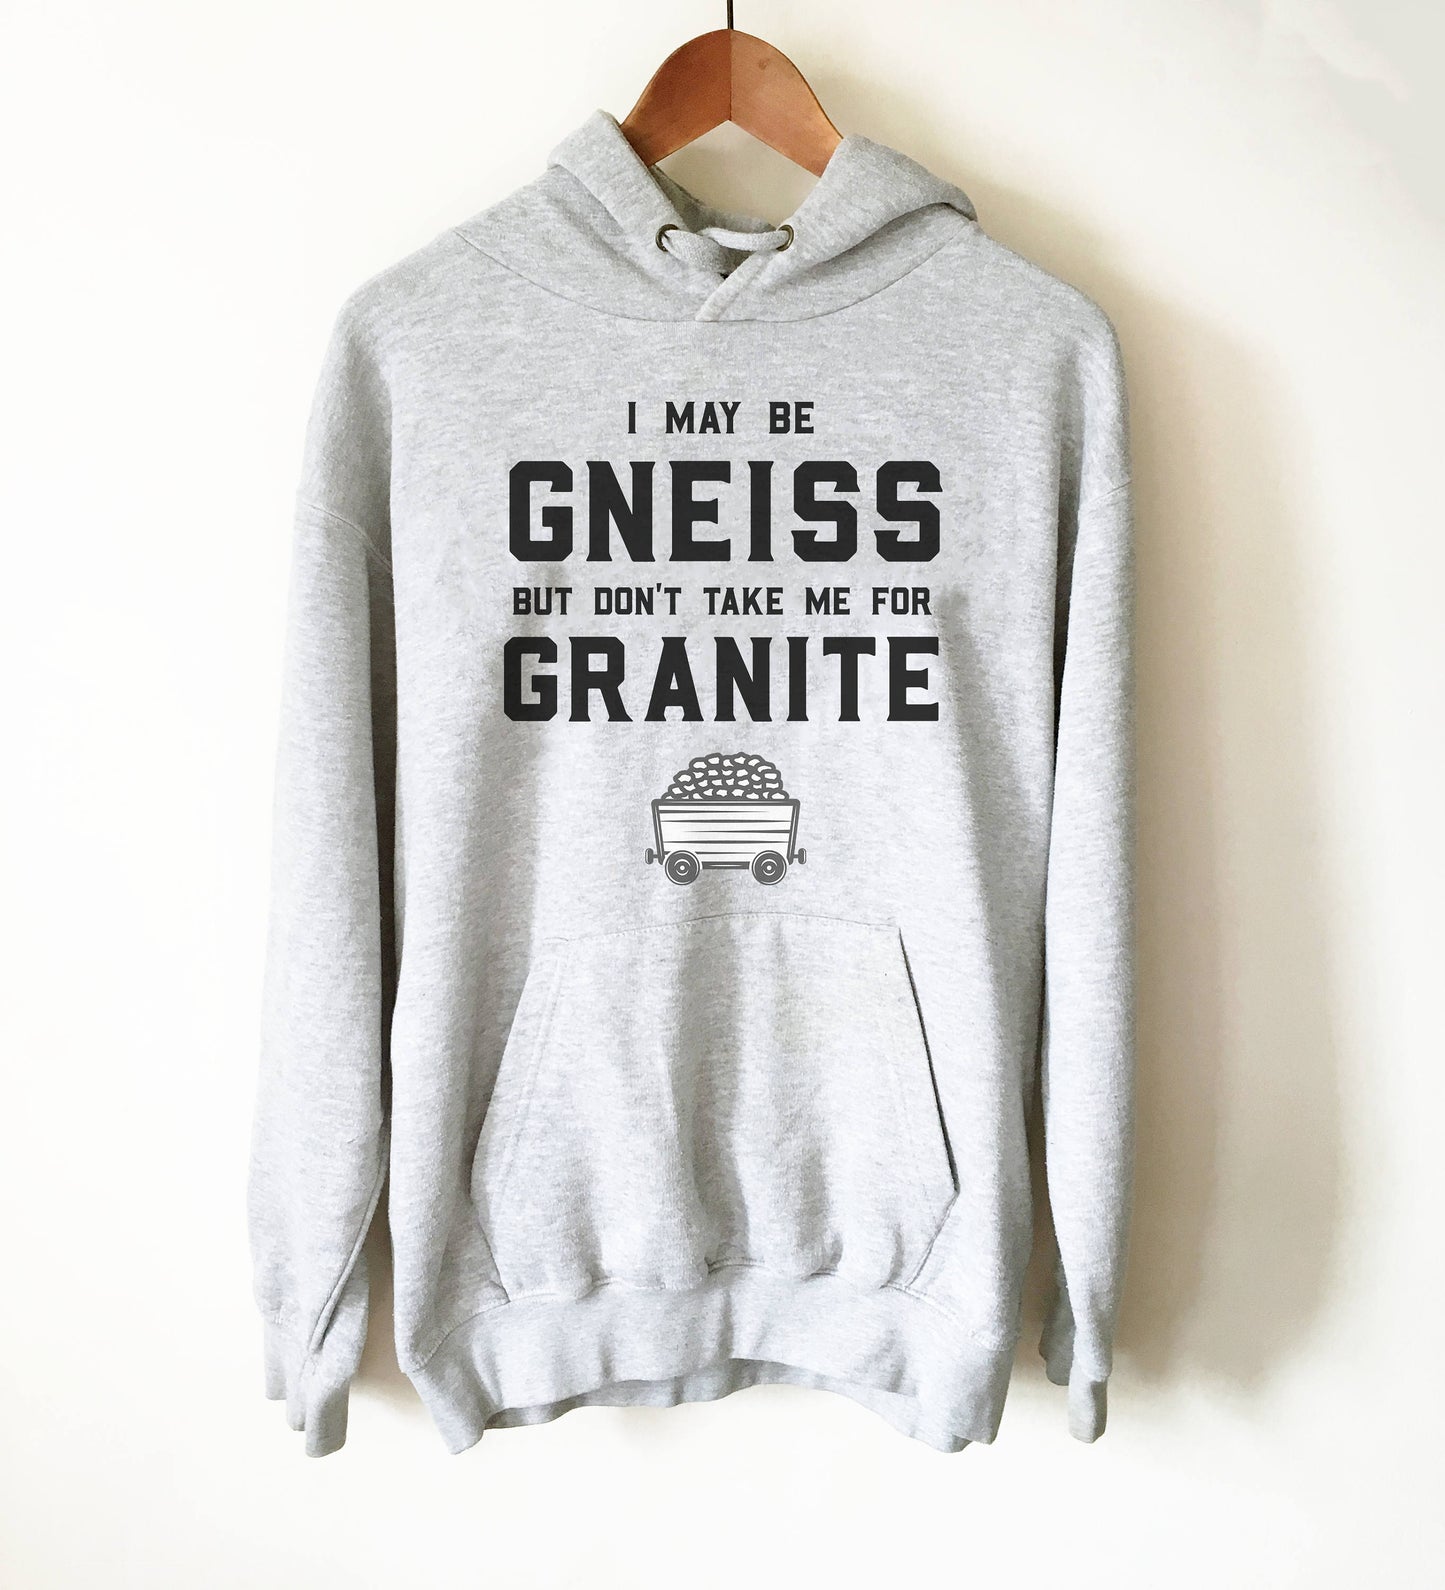 I May Be Gneiss But Don't Take Me For Granite Hooded Sweatshirt - Geology shirt, Geologist, Geologist gift, Geology Professor, Geology Puns